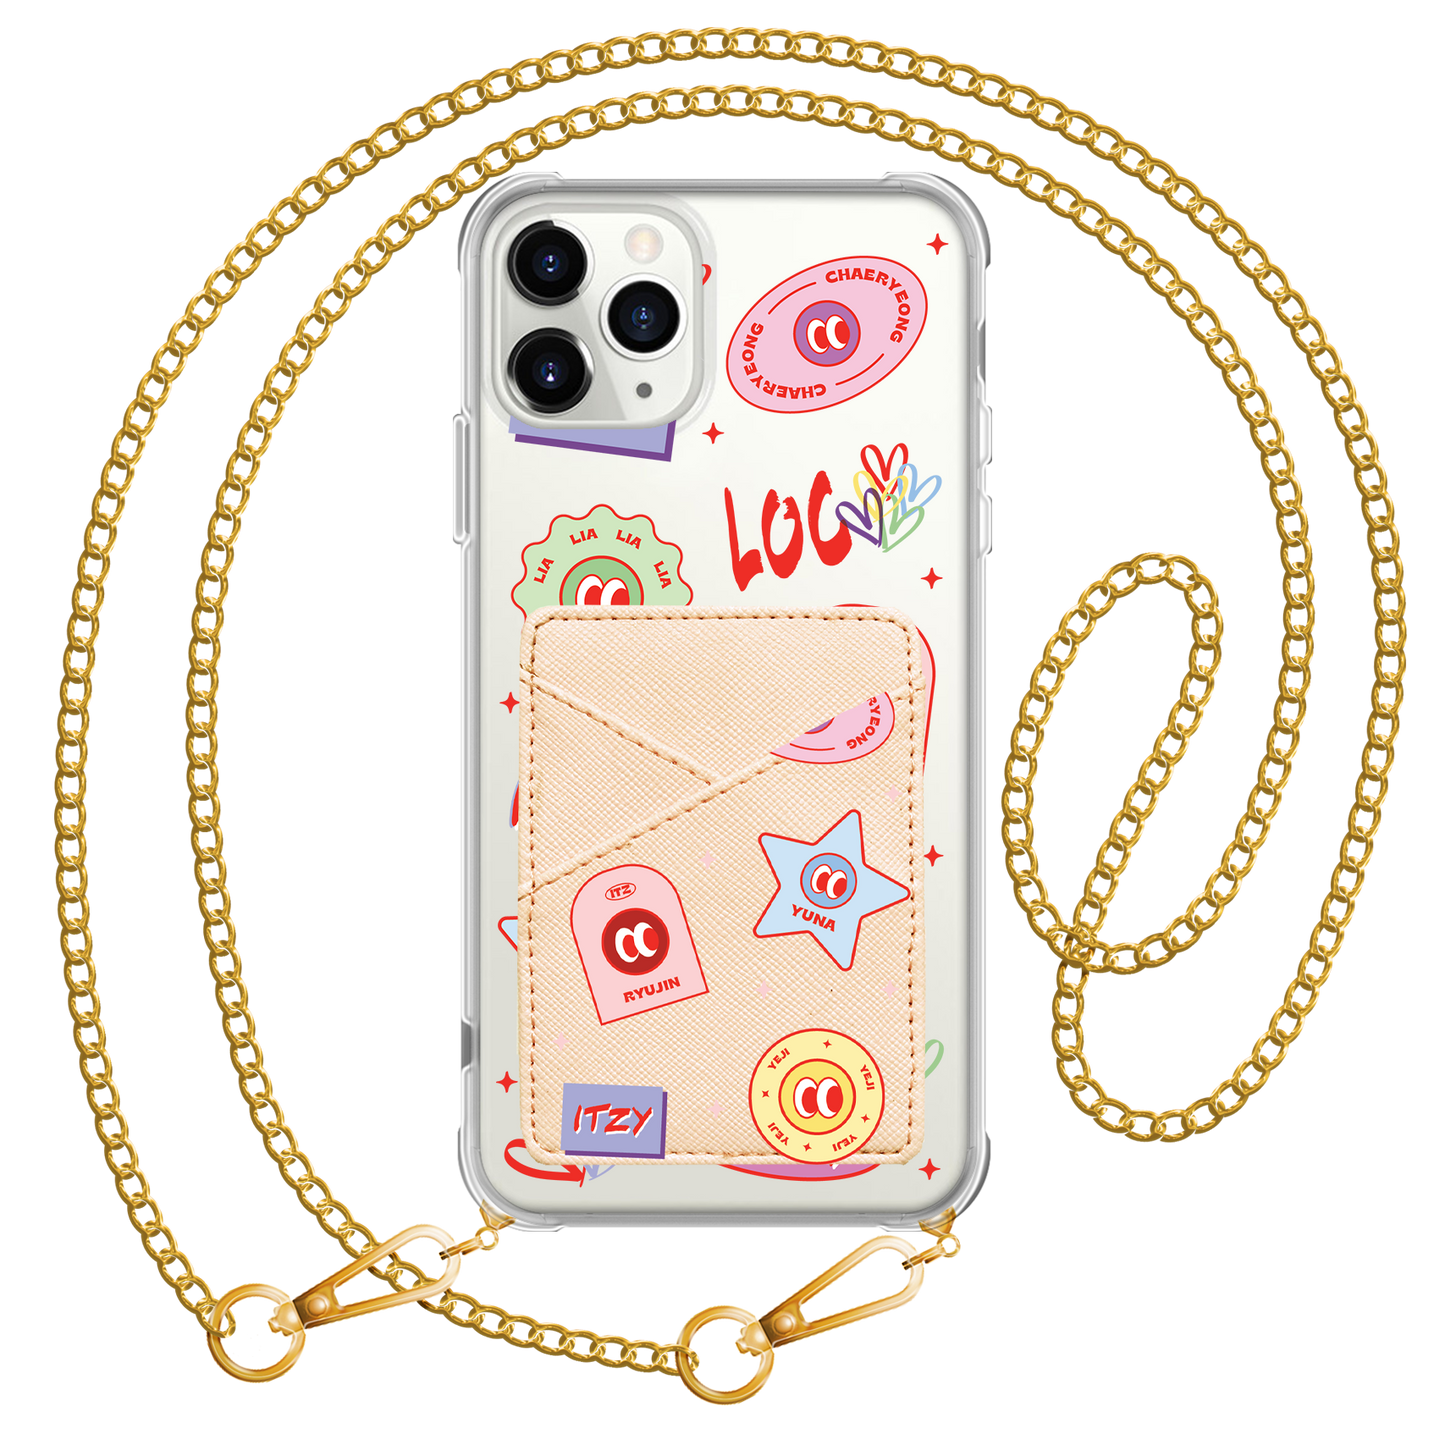 iPhone Phone Wallet Case - Itzy Sticker Pack